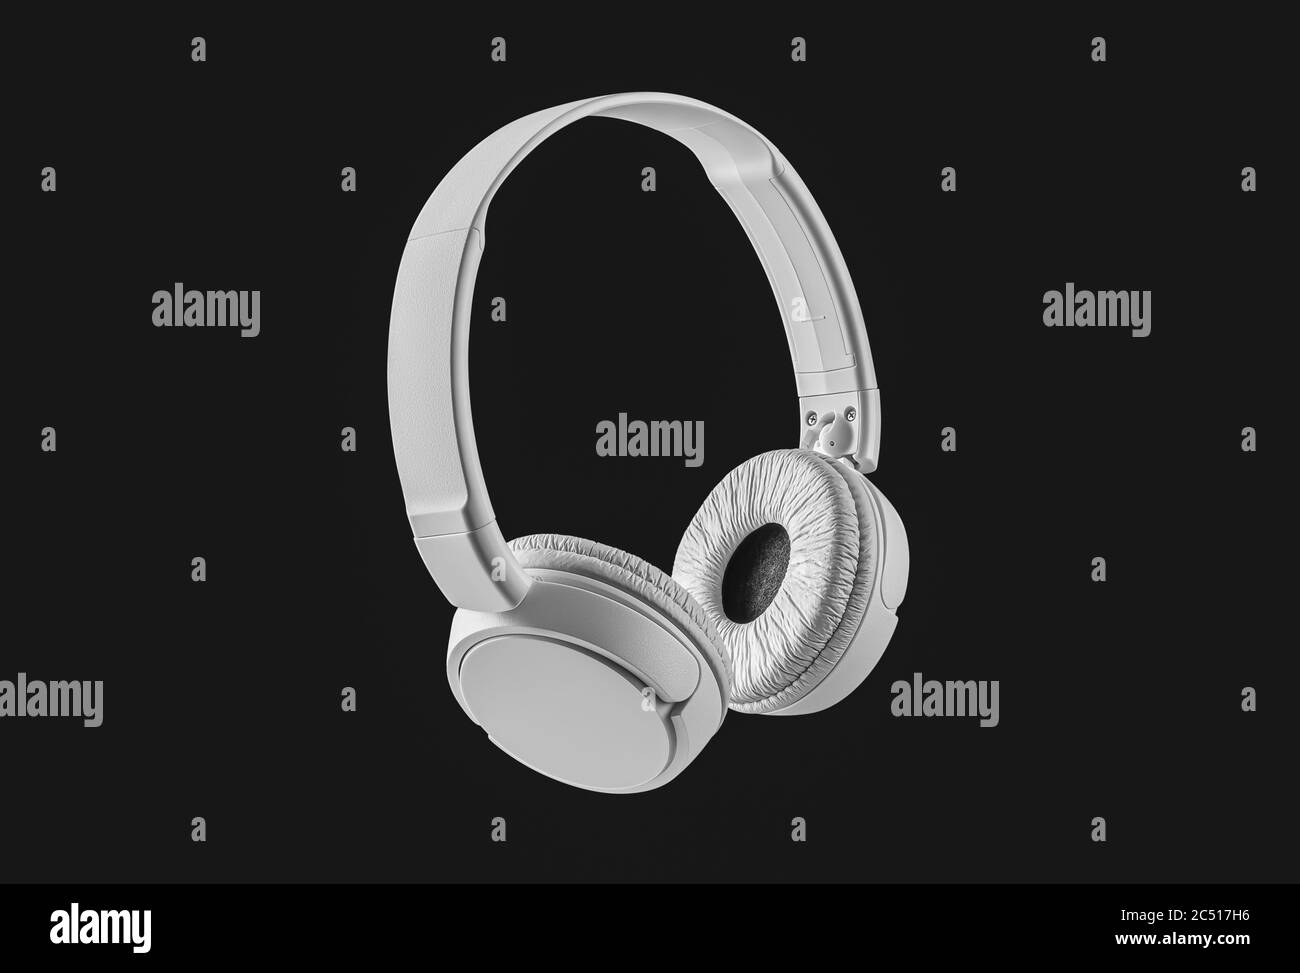 Modern white wireless headphones on a black background. Earphones with copy space and clipping path. Design element. Stock Photo